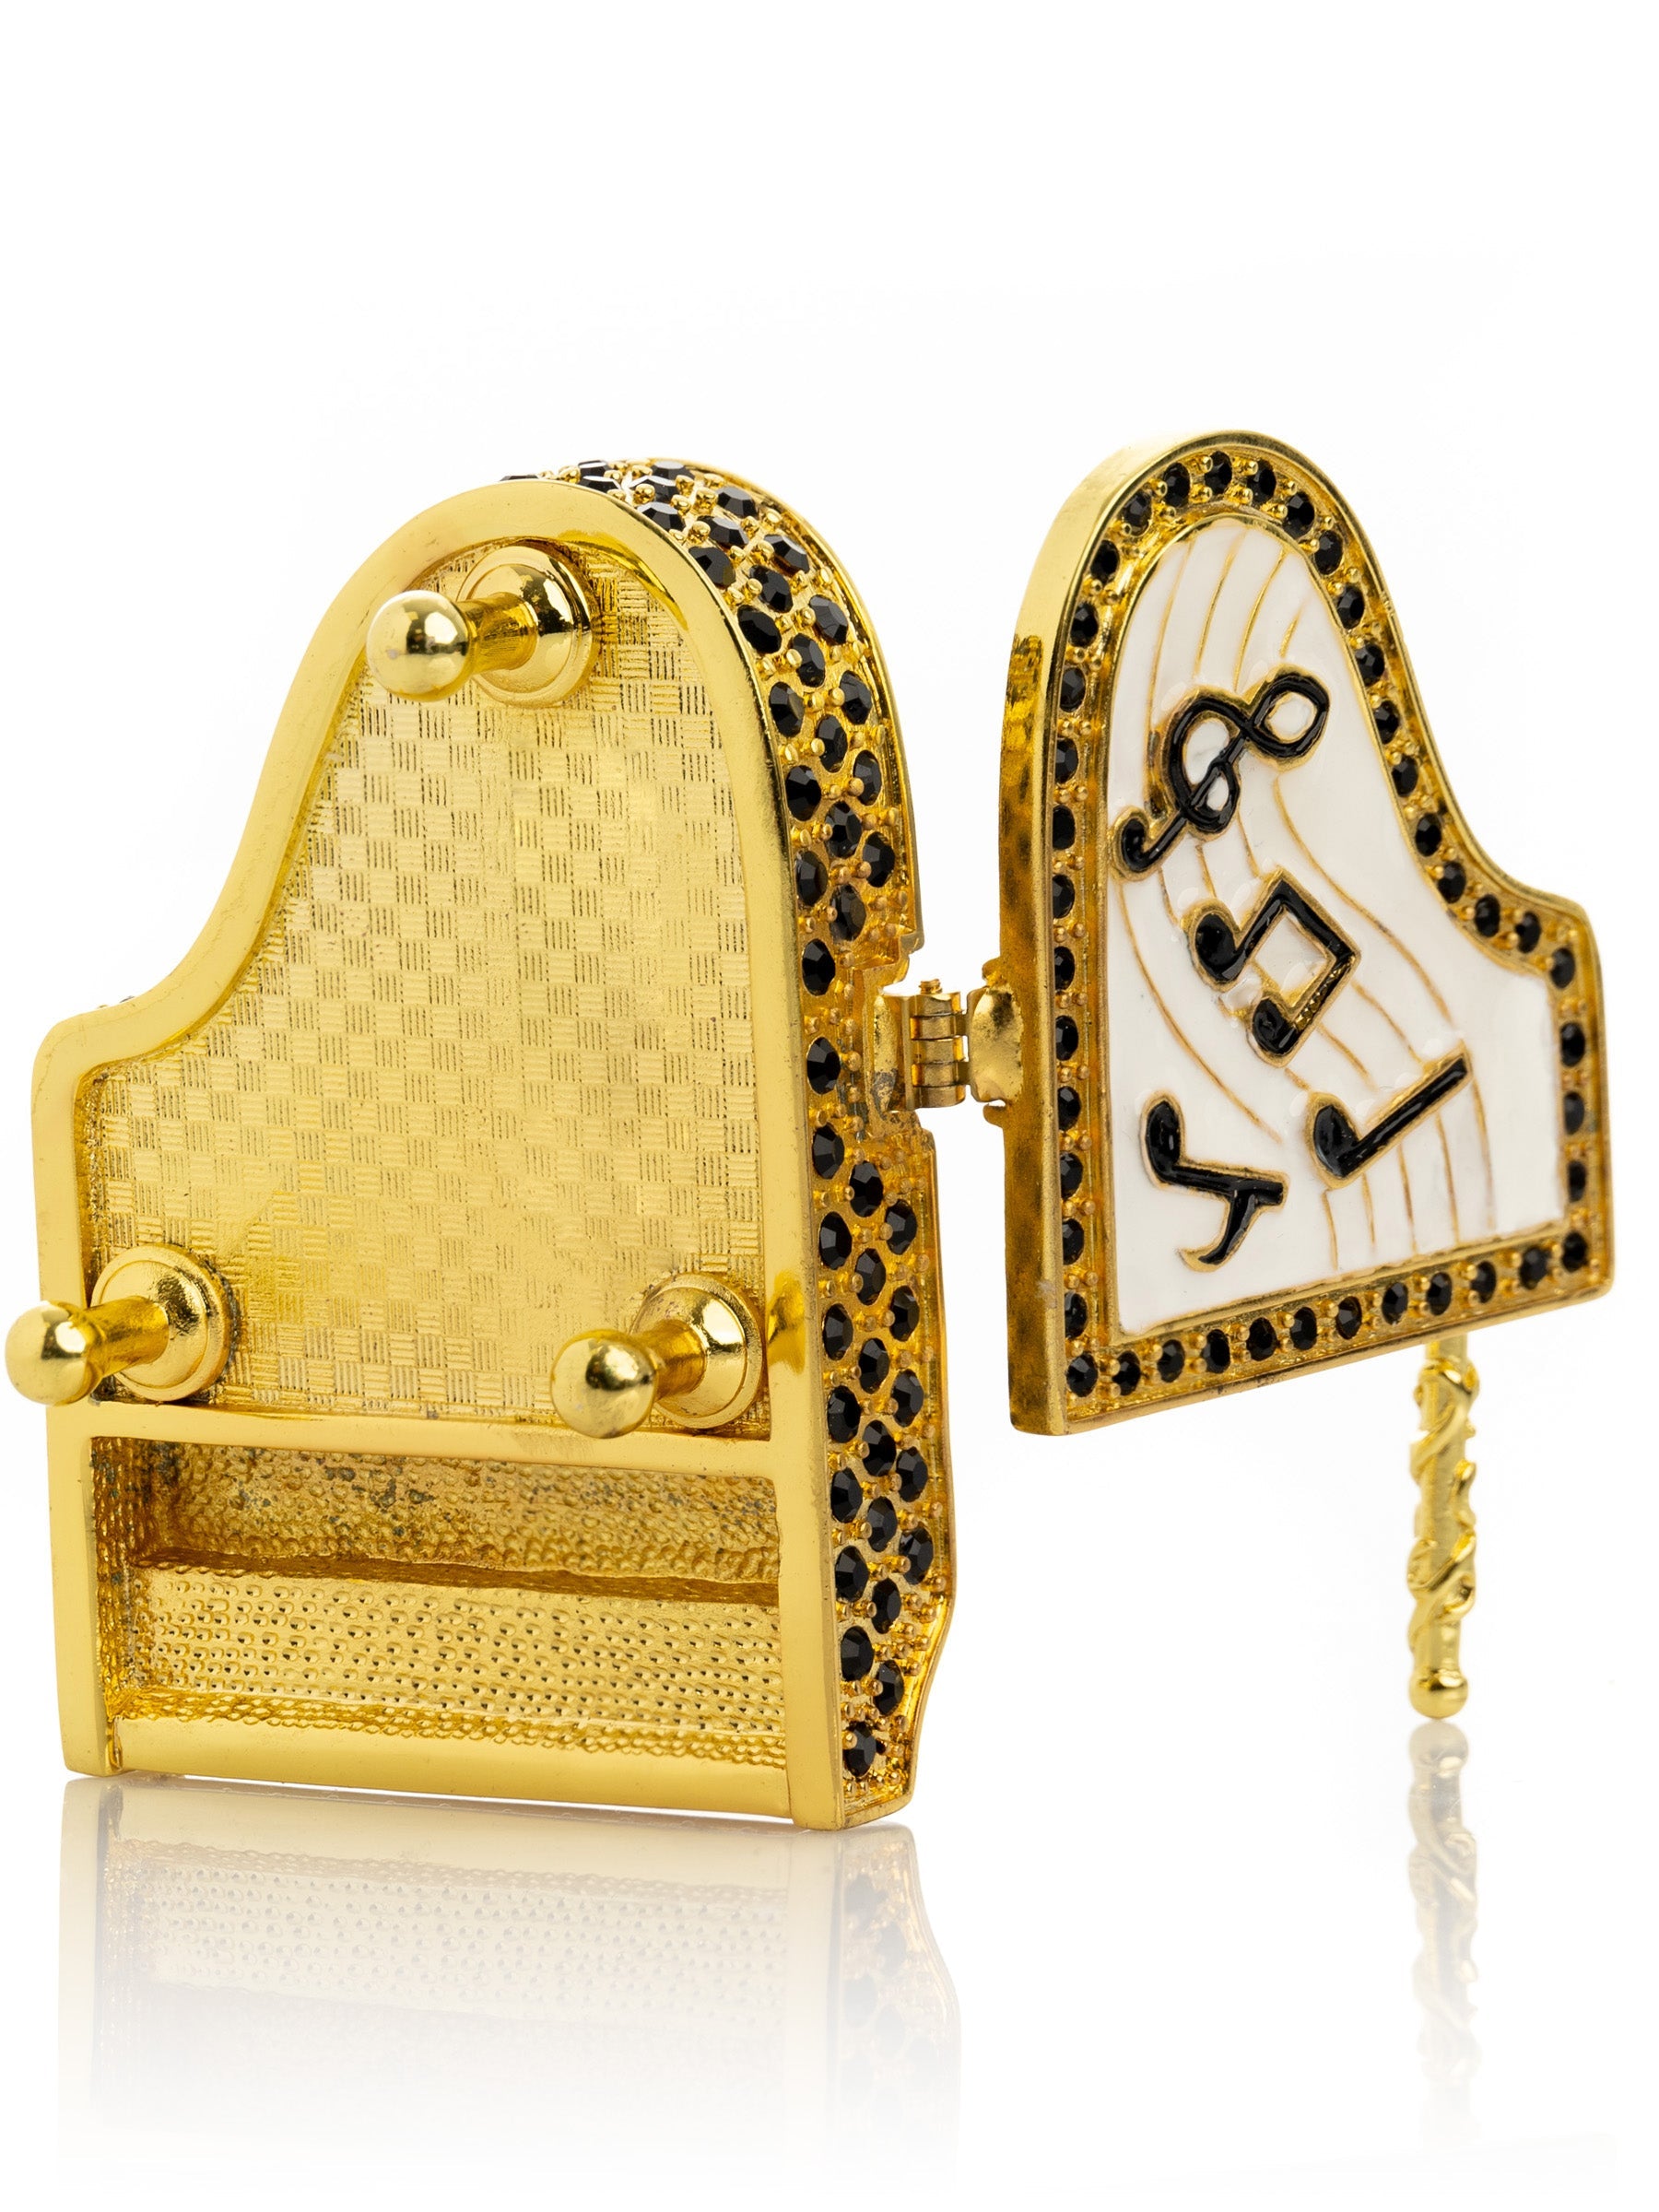 Golden White Piano with Black Crystals-7